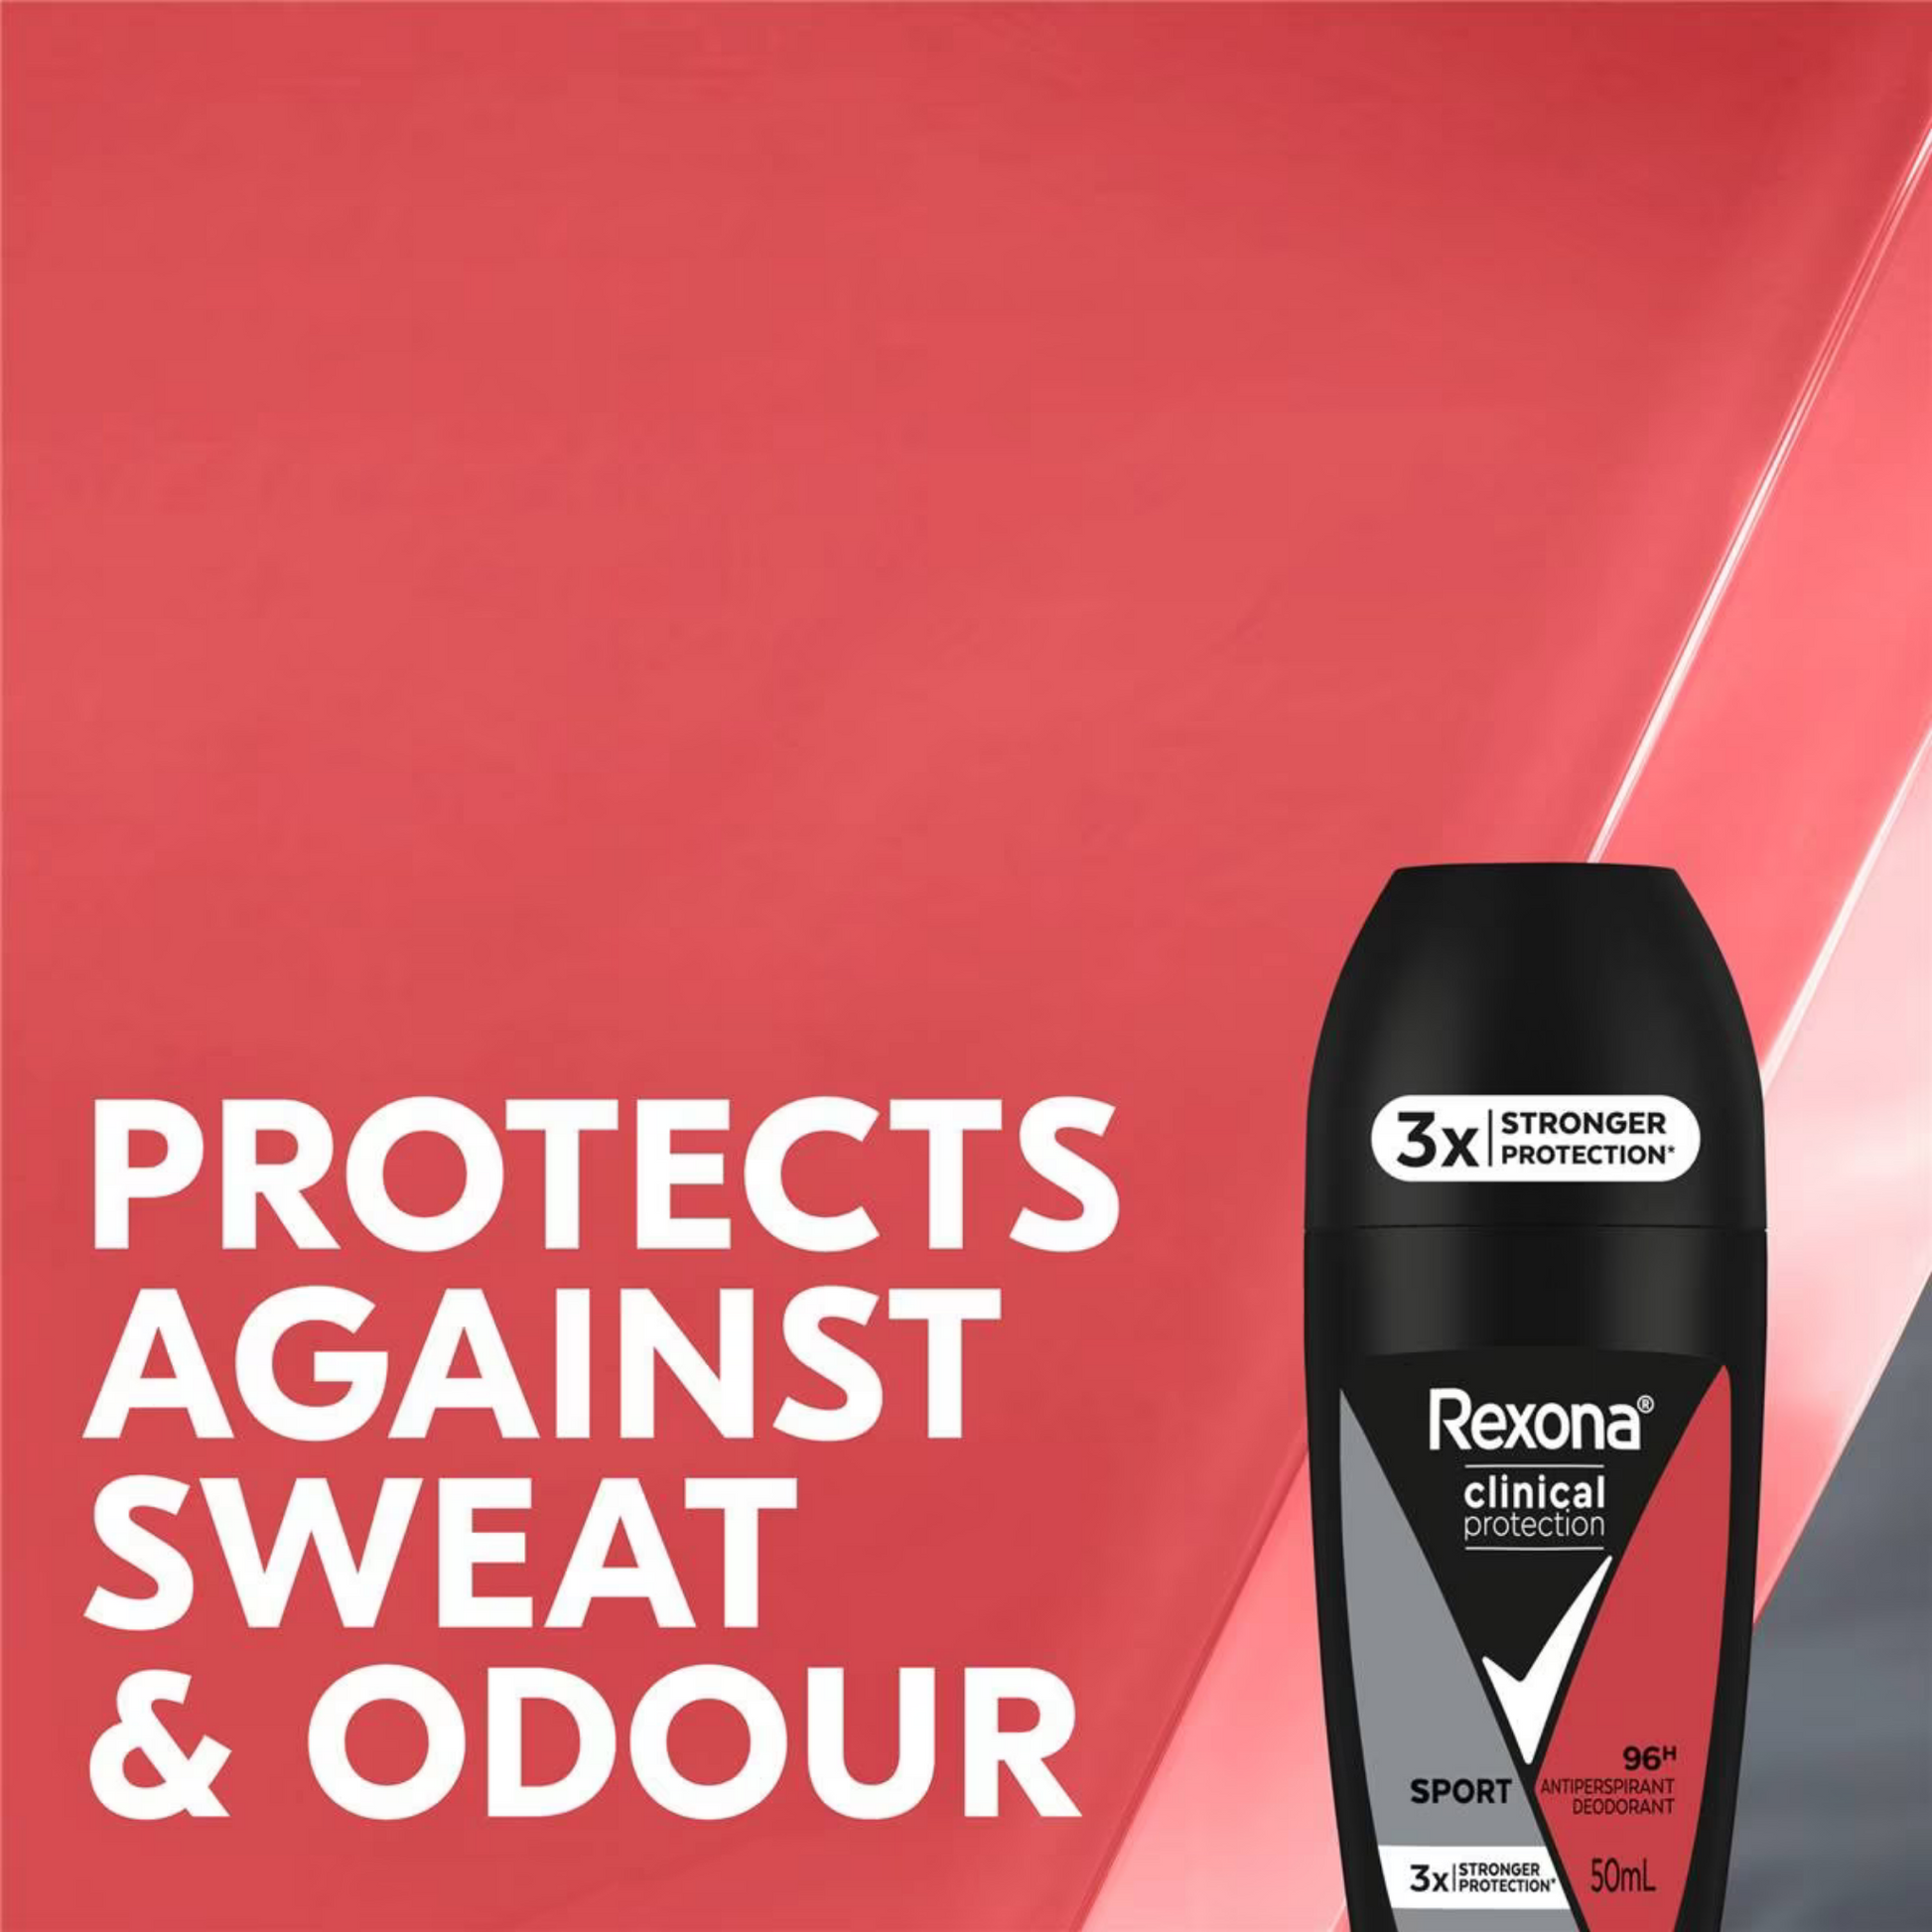 Rexona Clinical Protection Deodorant Roll-On For Men - Sport is a clinical-strength antiperspirant deodorant roll on you can rely on, with a clean, masculine scent.. Best imported foreign Australian authentic original genuine real premium quality luxury brand cheap fragrance price in Dhaka Chittagong Bangladesh.